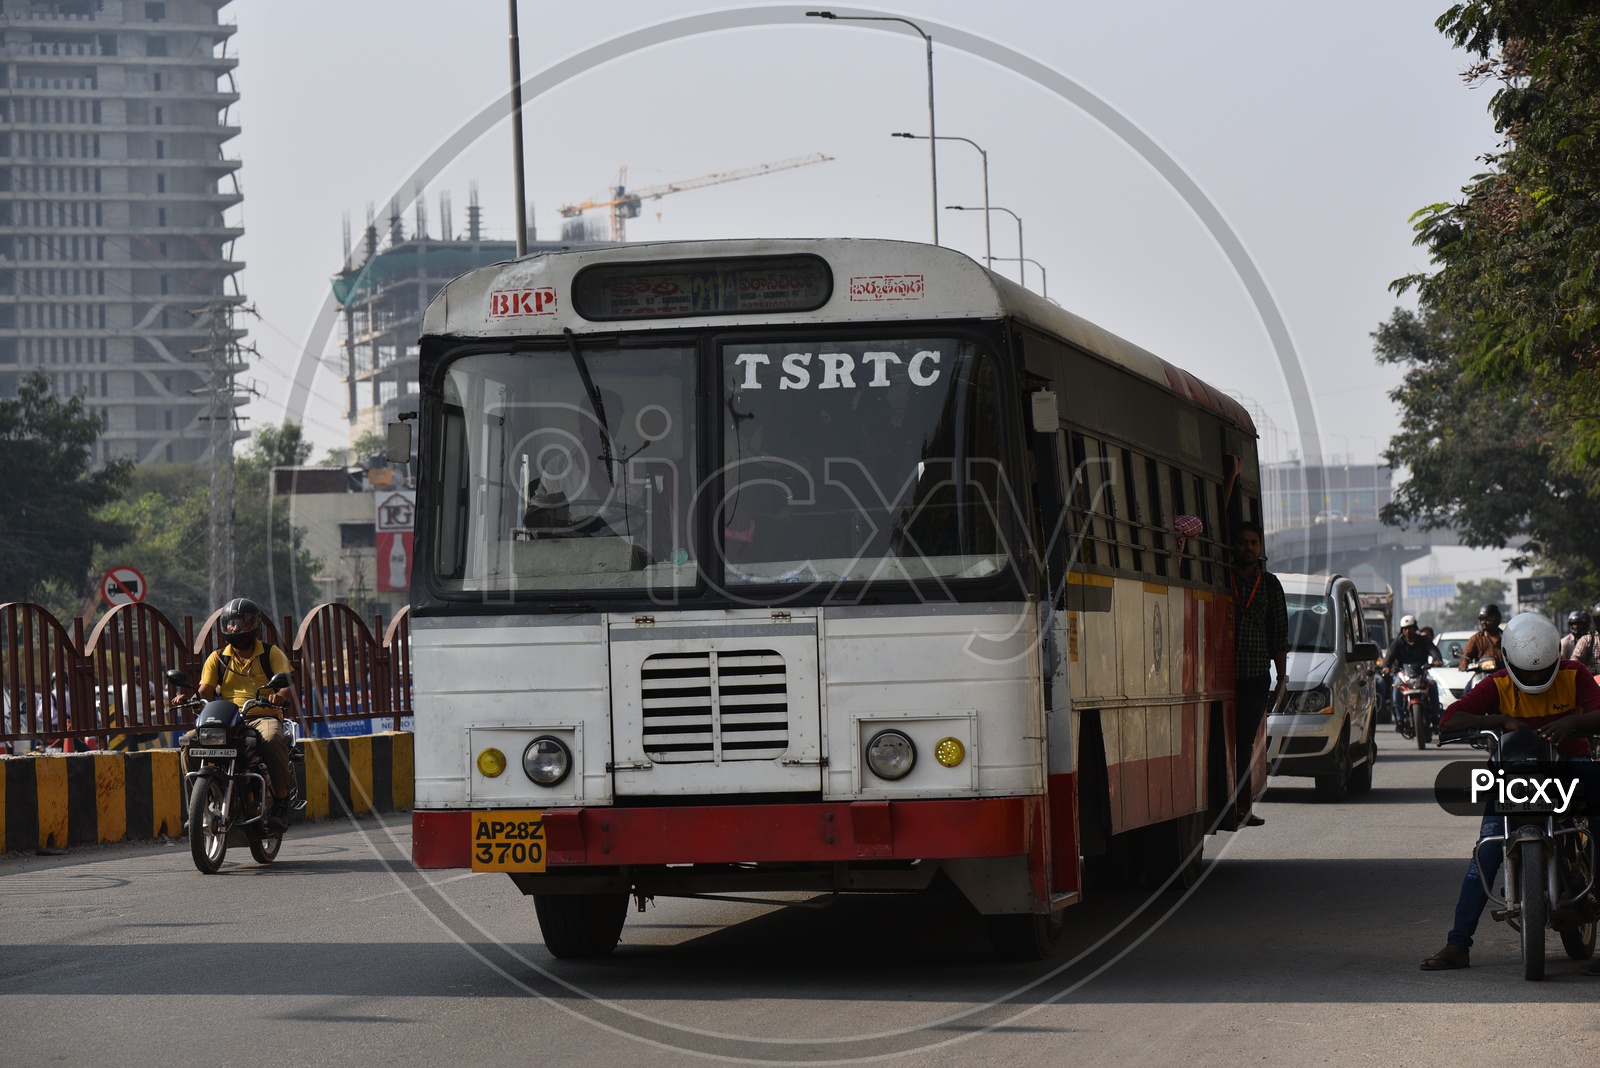 TSRTC Called off their indefinite strike after 52 days on 25th November 2019